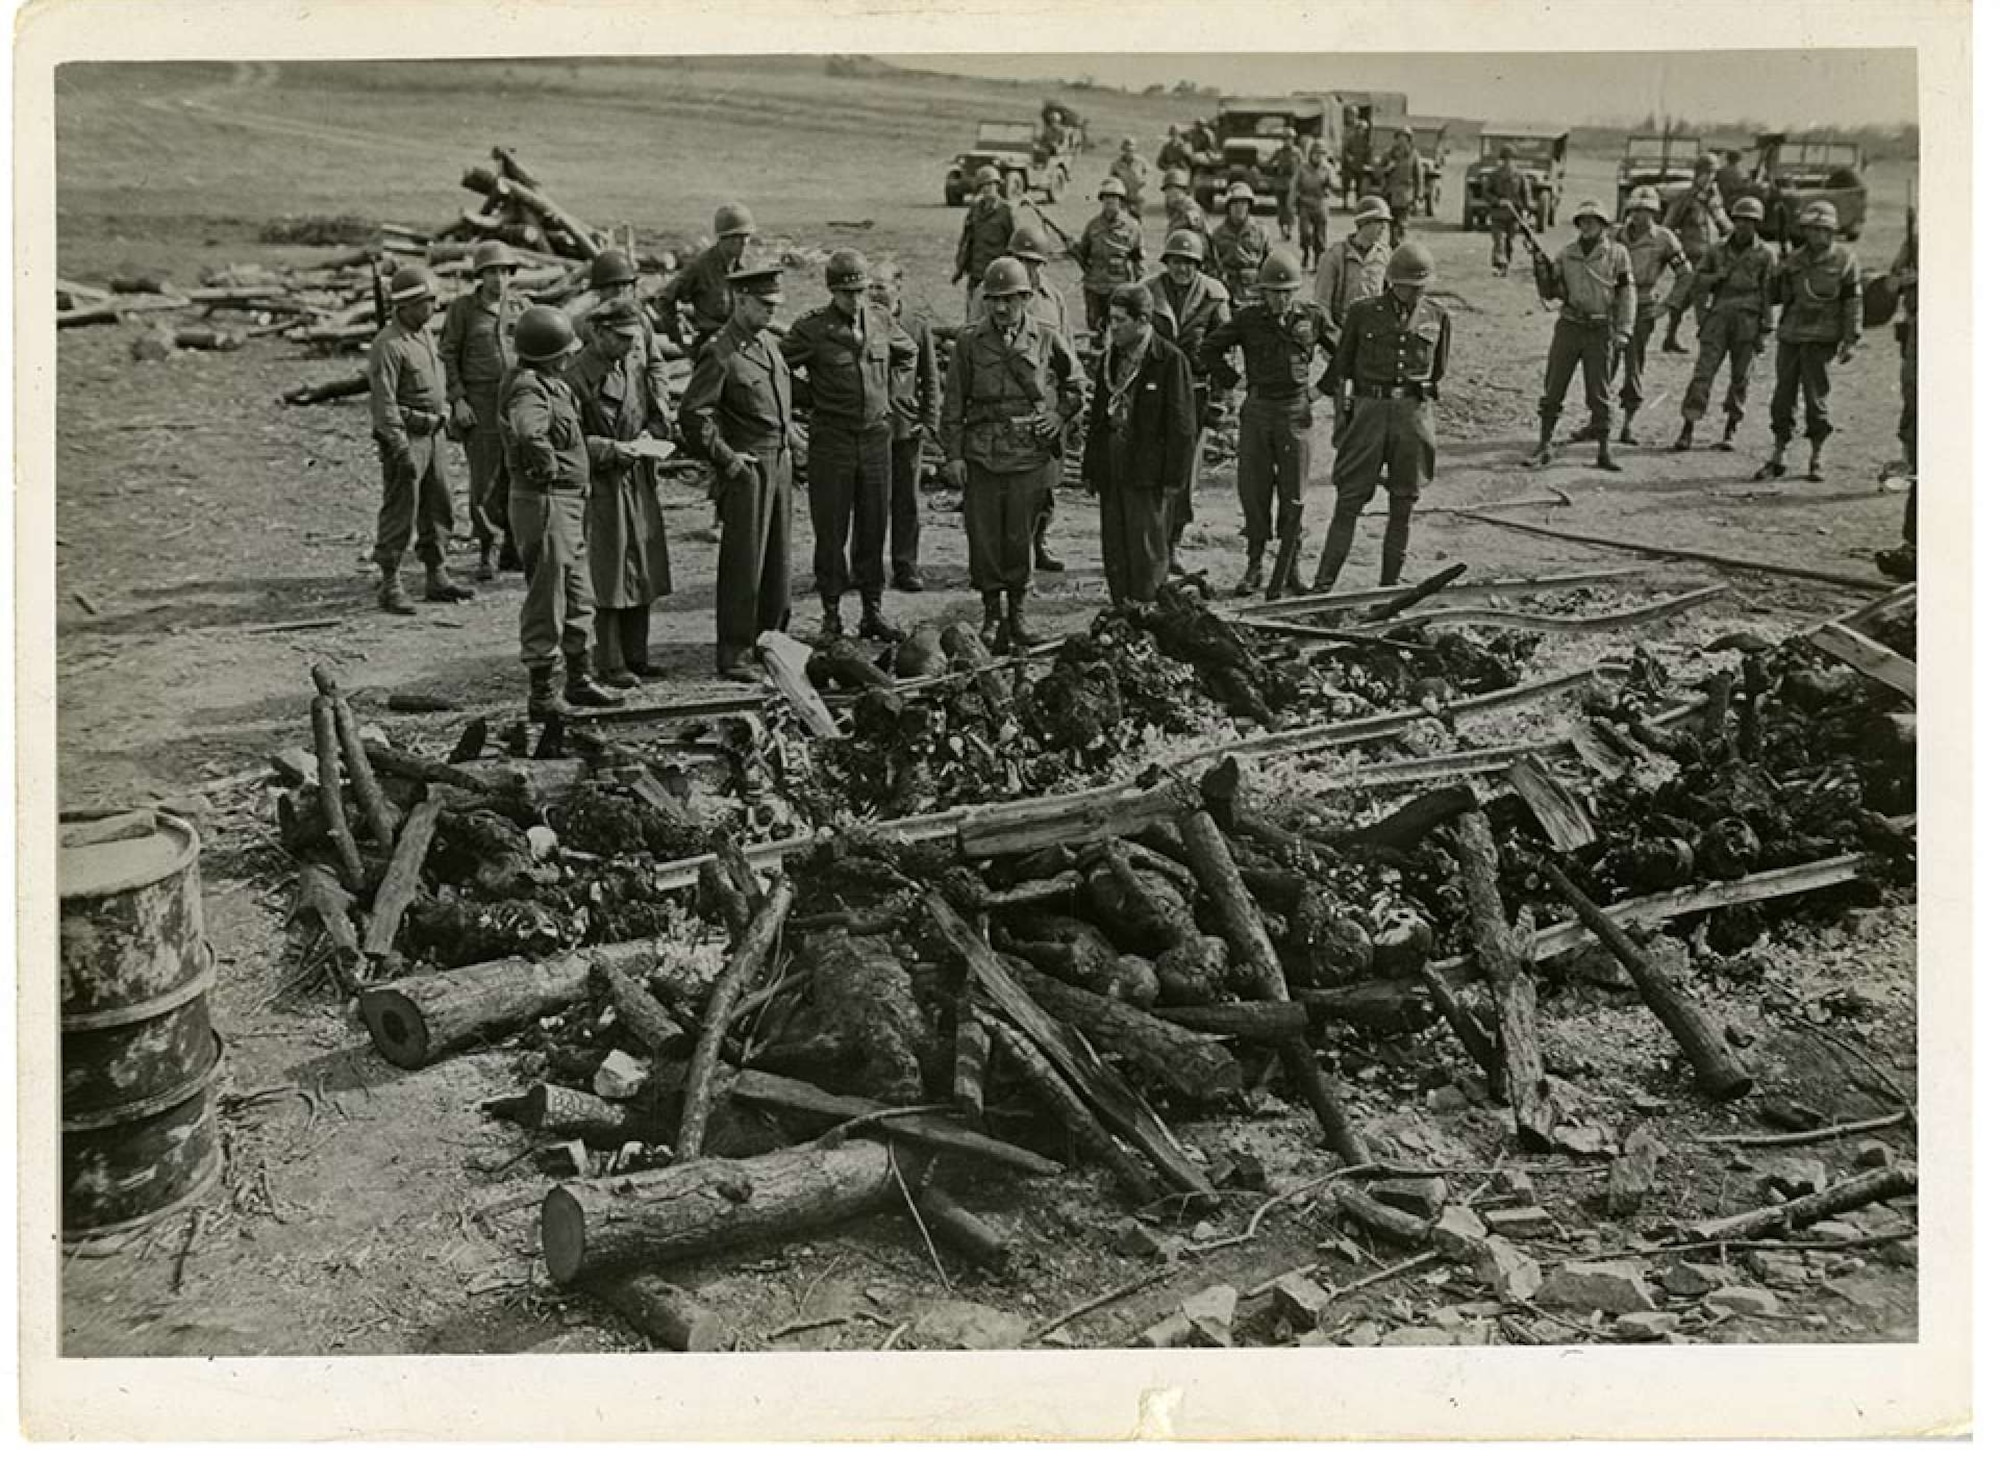 The 371st Fighter Group and the Aftermath of the Holocaust